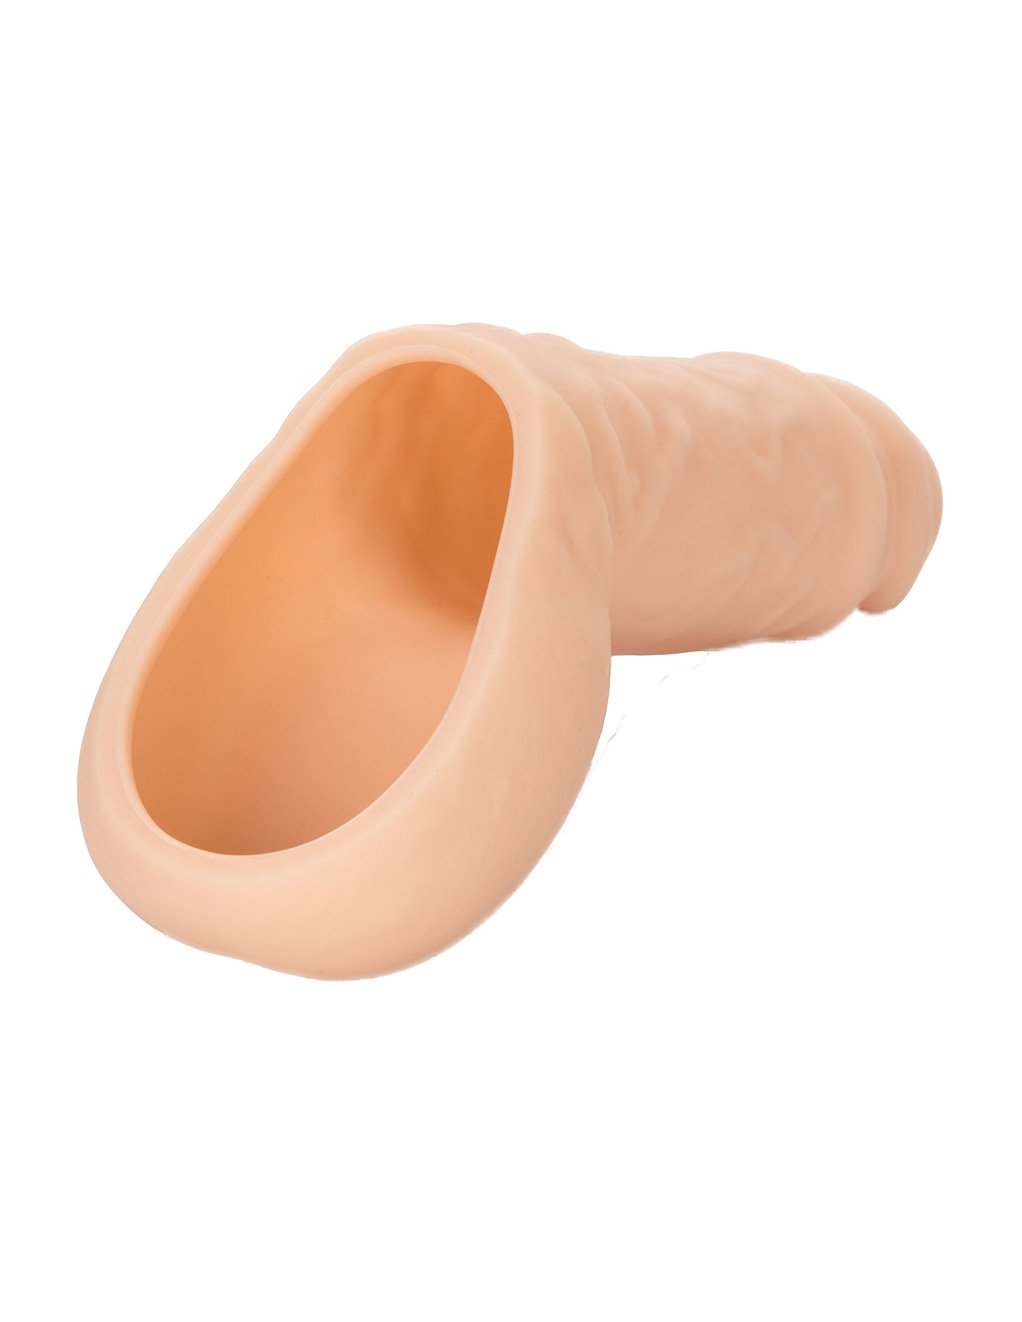 Packer Gear Silicone Hollow Packer Penis- Ivory- Bottom